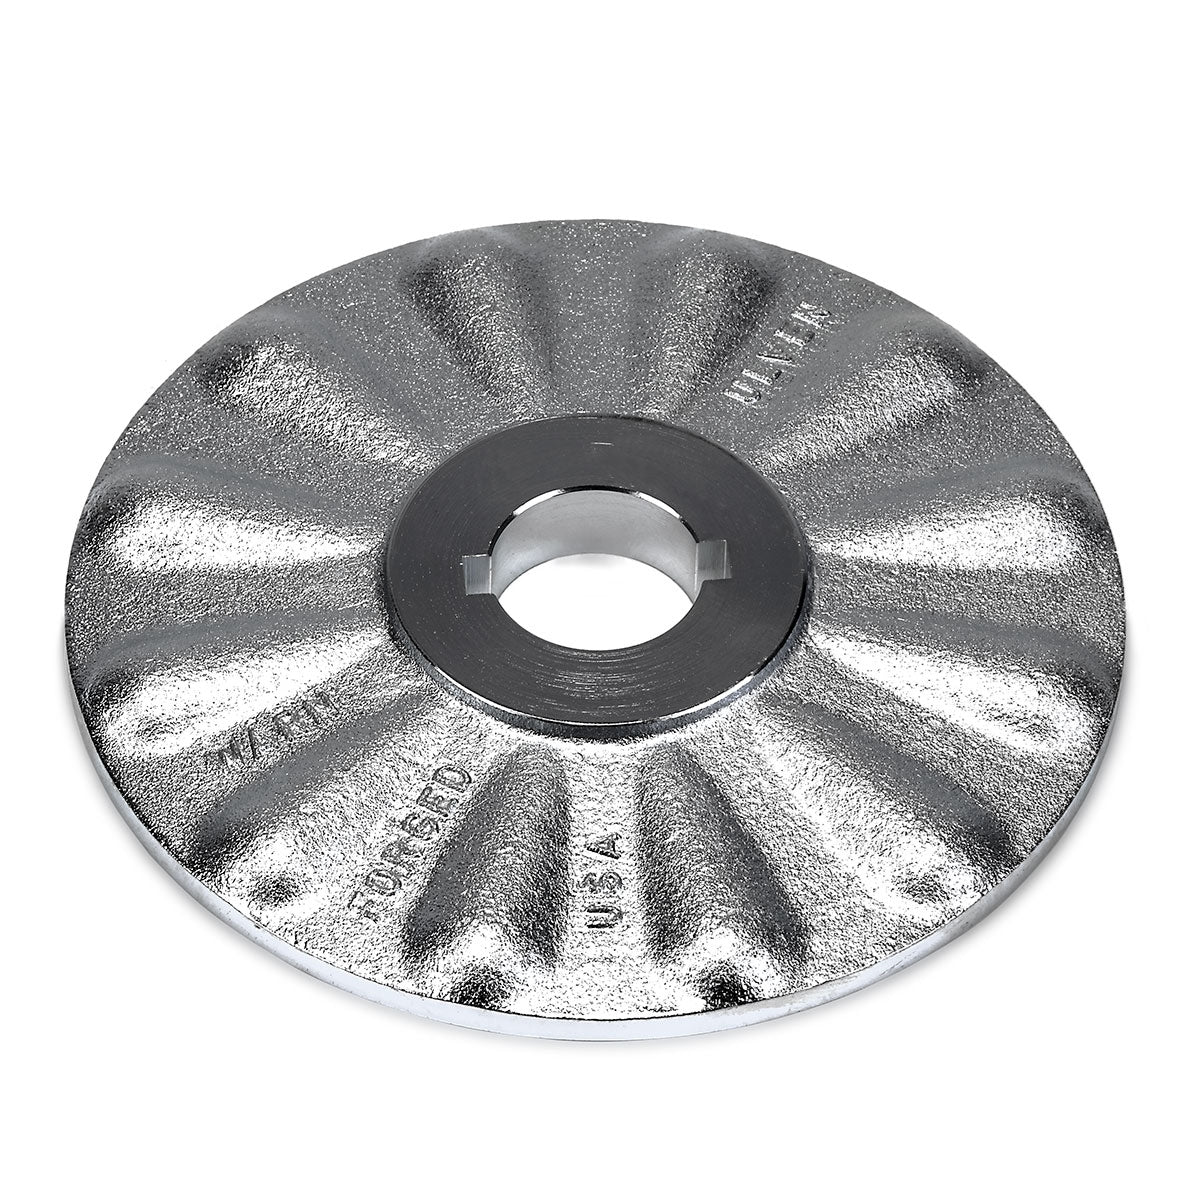 Replacement Brake Disc compatible with CE M8274-50 and M8274 (24V).